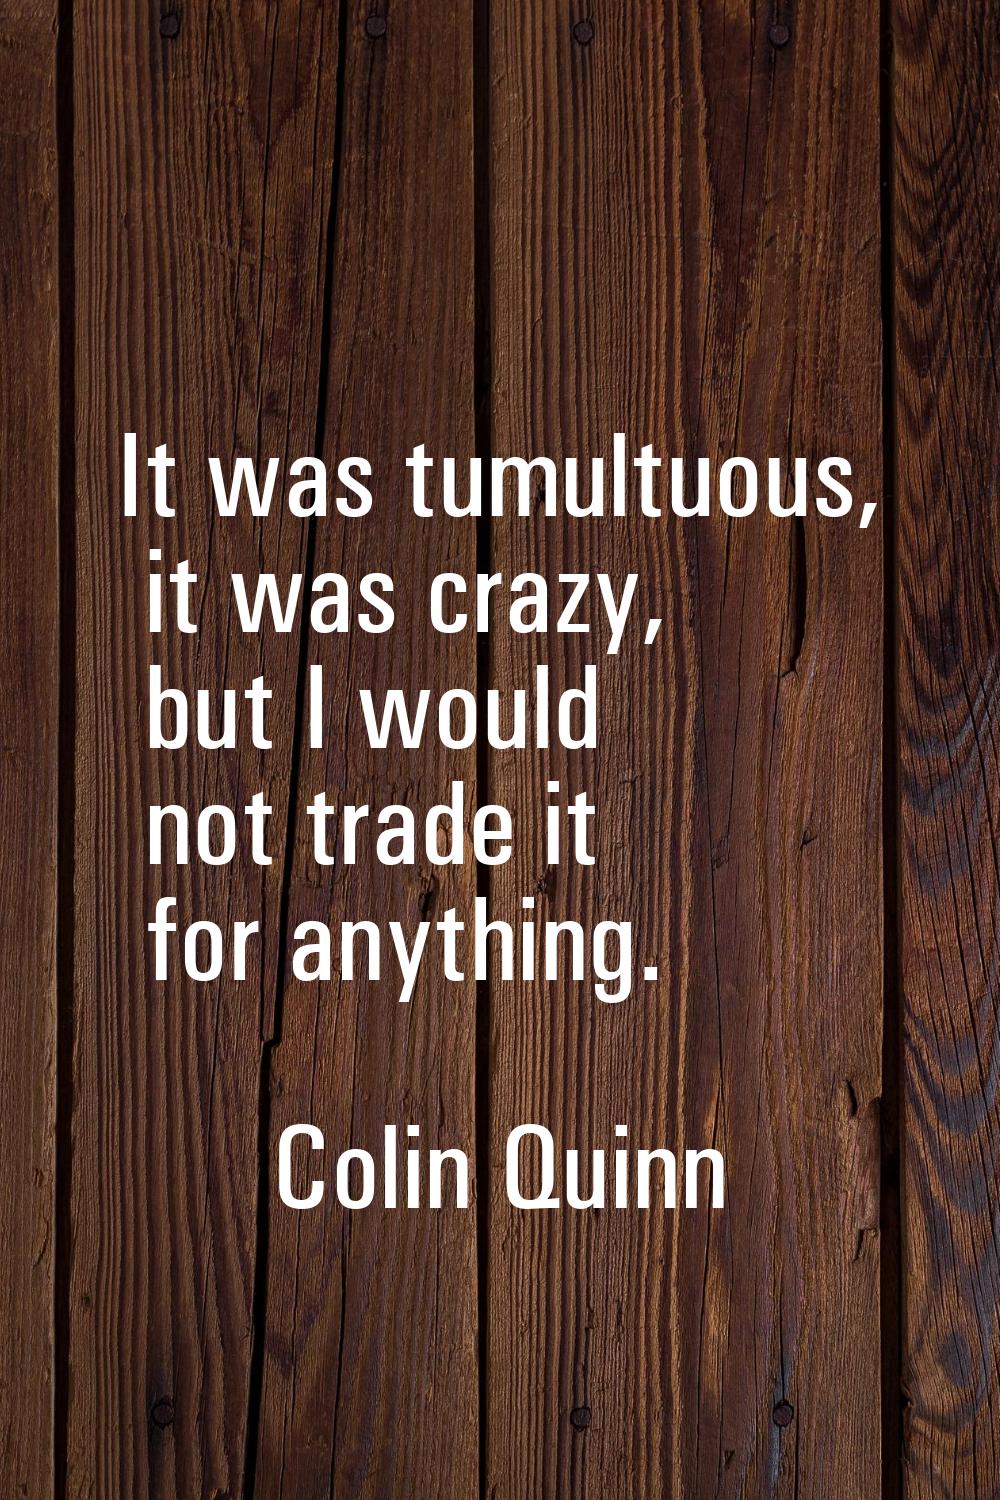 It was tumultuous, it was crazy, but I would not trade it for anything.